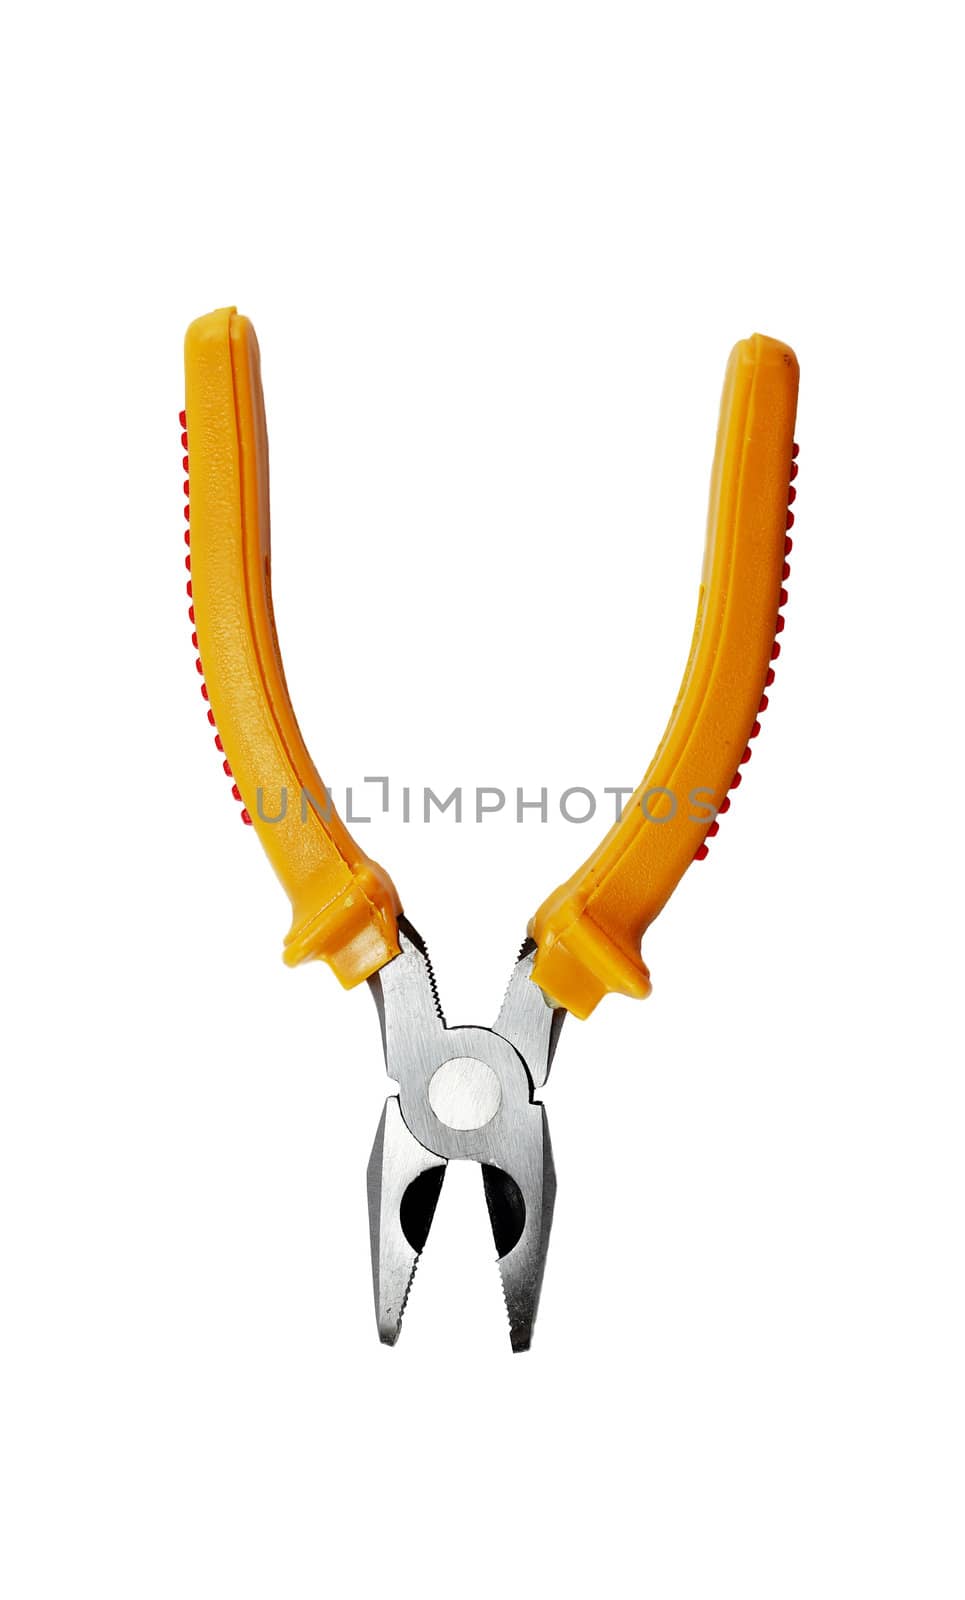 Pliers in white background.